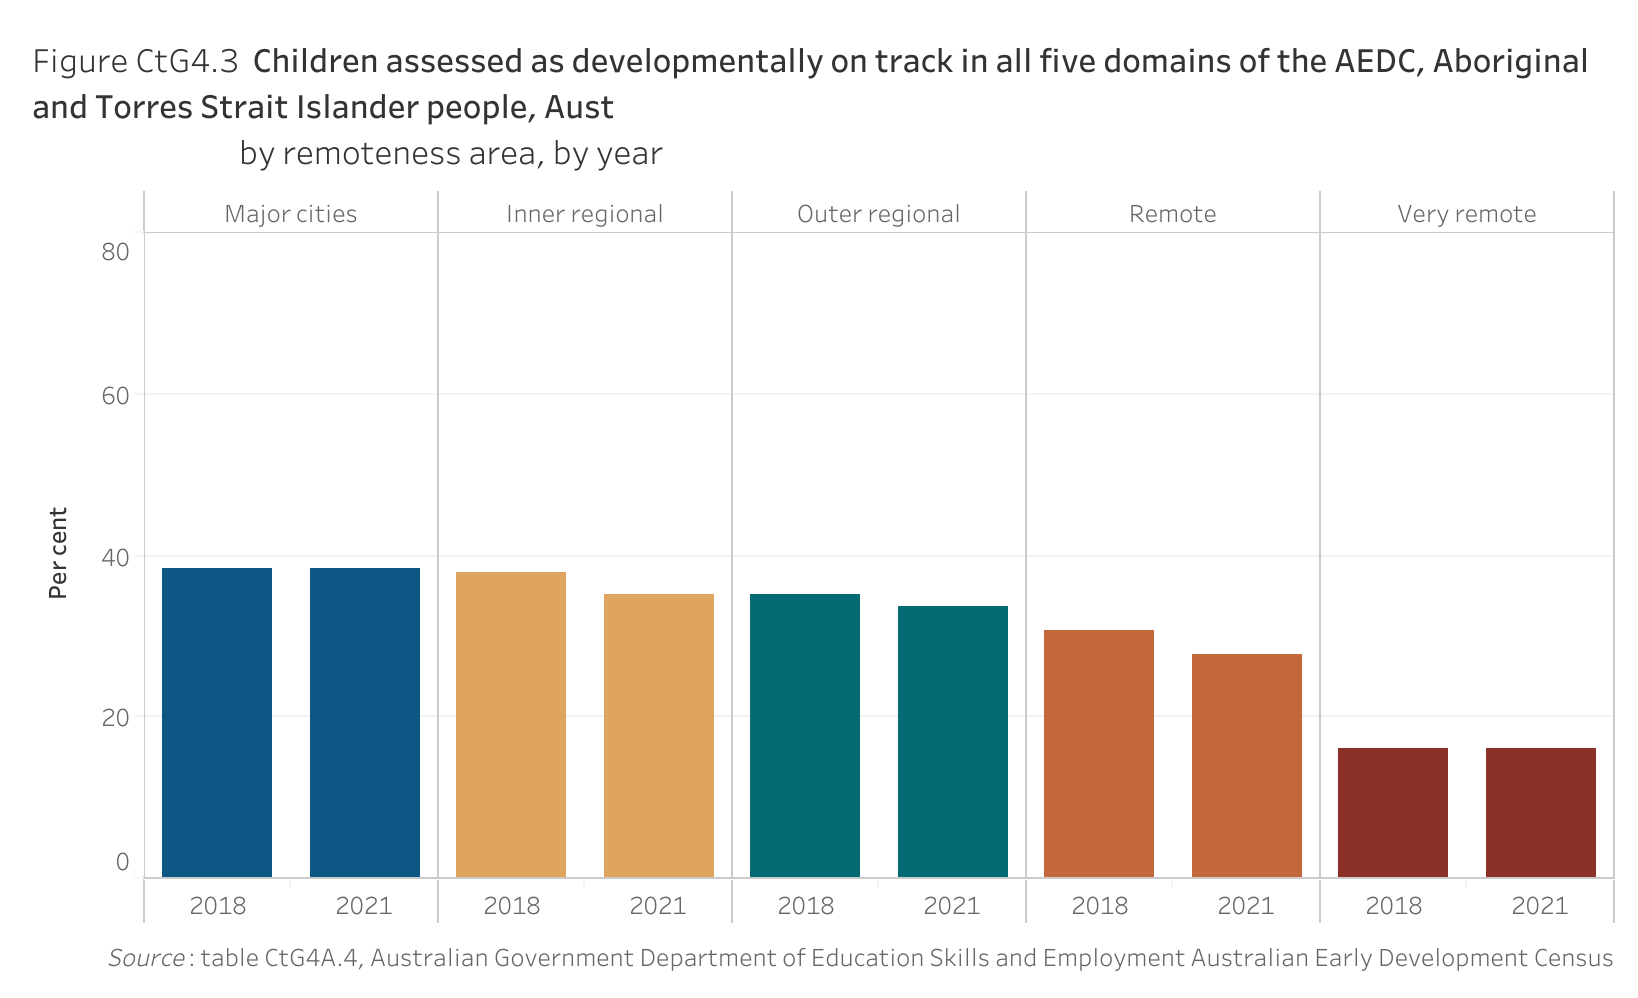 Figure CtG4.3. Bar chart showing the proportion of Aboriginal and Torres Strait Islander children assessed as developmentally on track in all five domains of the Australian Early Development Census (AEDC) in Australia, by remoteness area and by year. Data table of figure CtG4.3 is below.